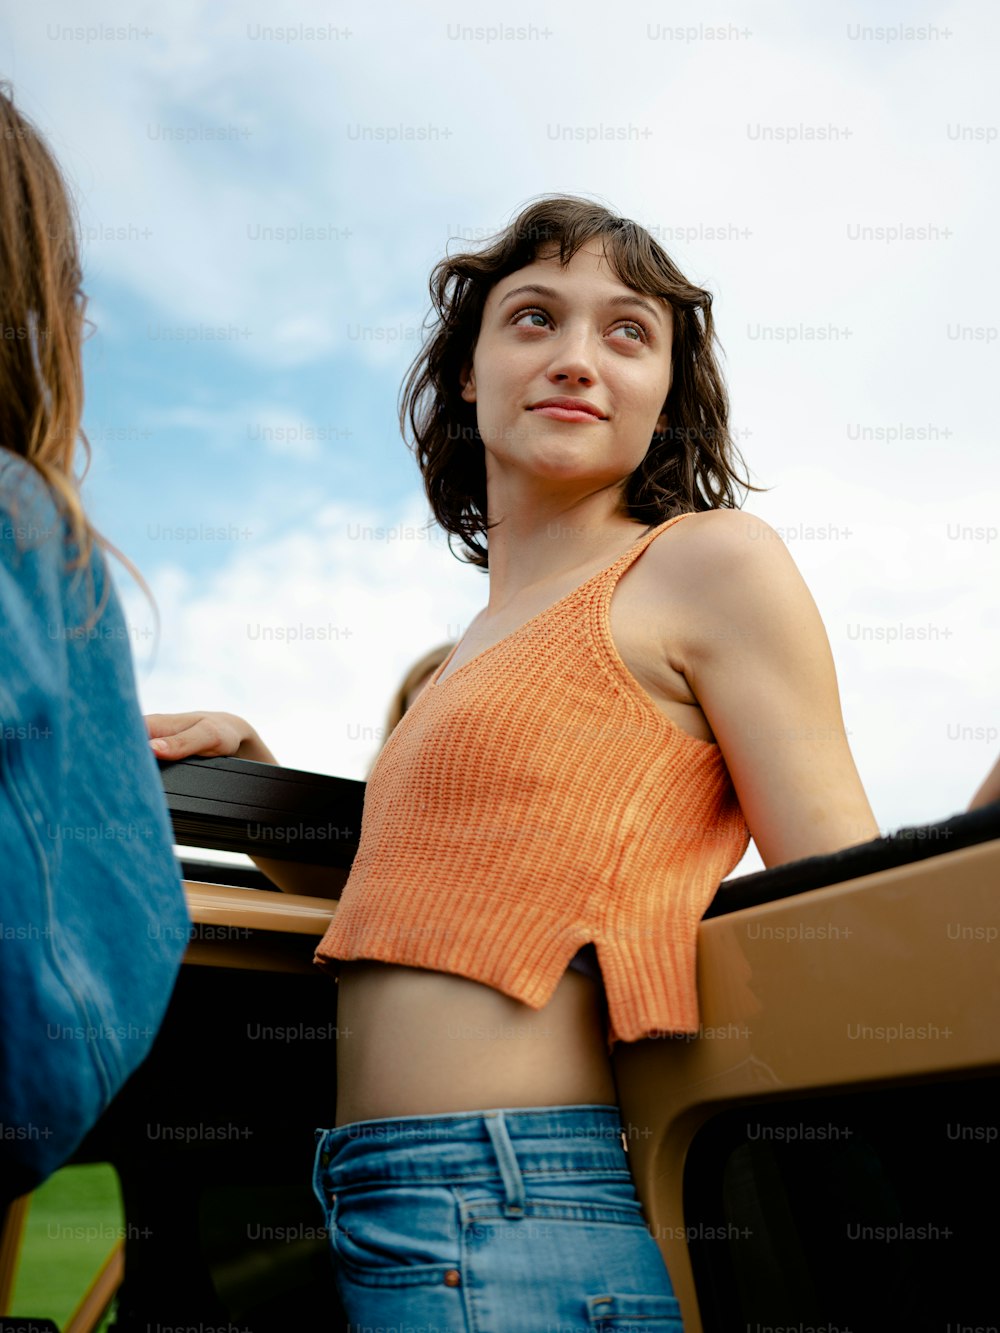 a woman in an orange top standing next to a tv